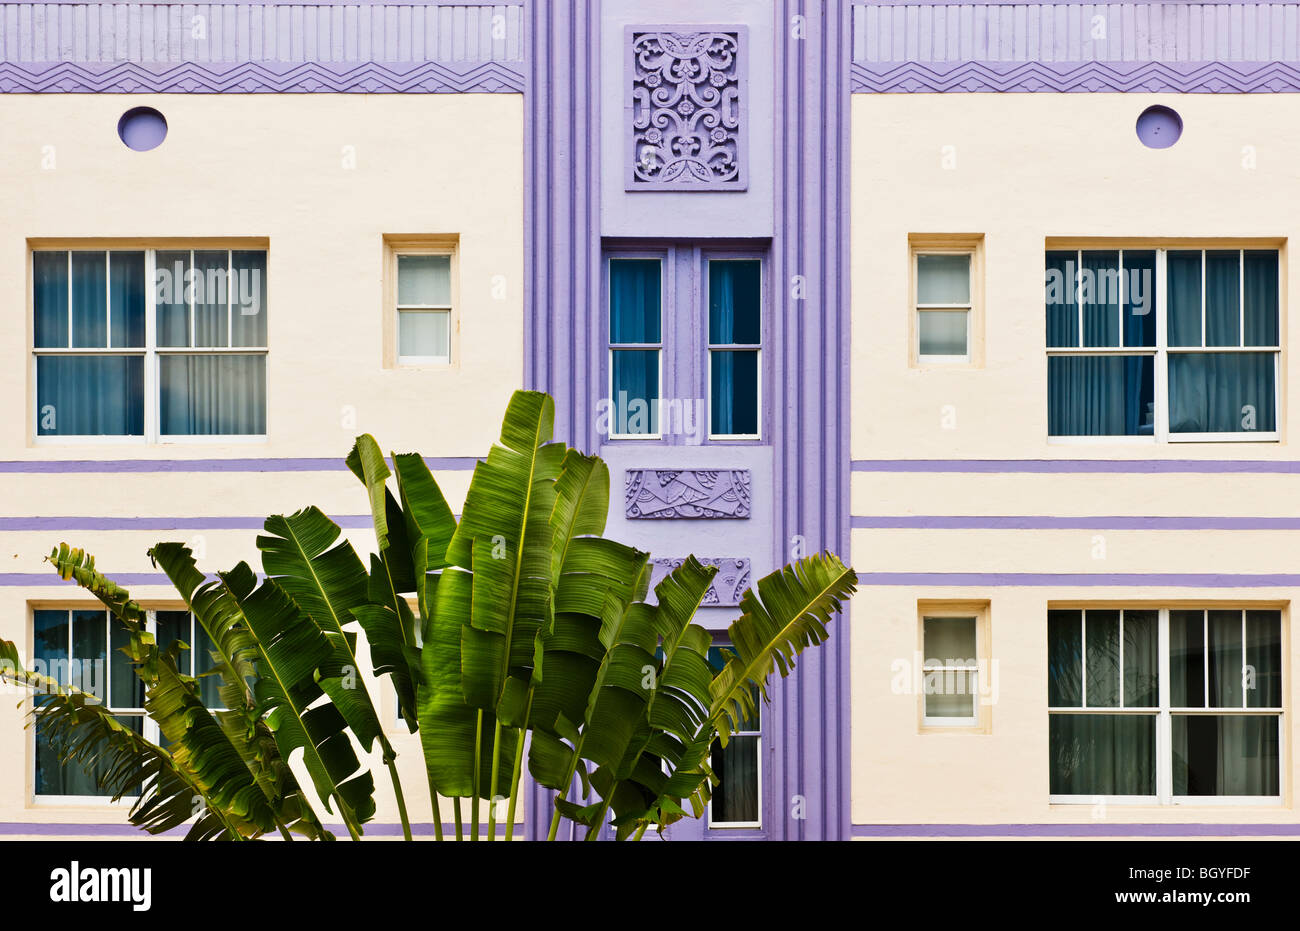 Plant and exterior of building Stock Photo